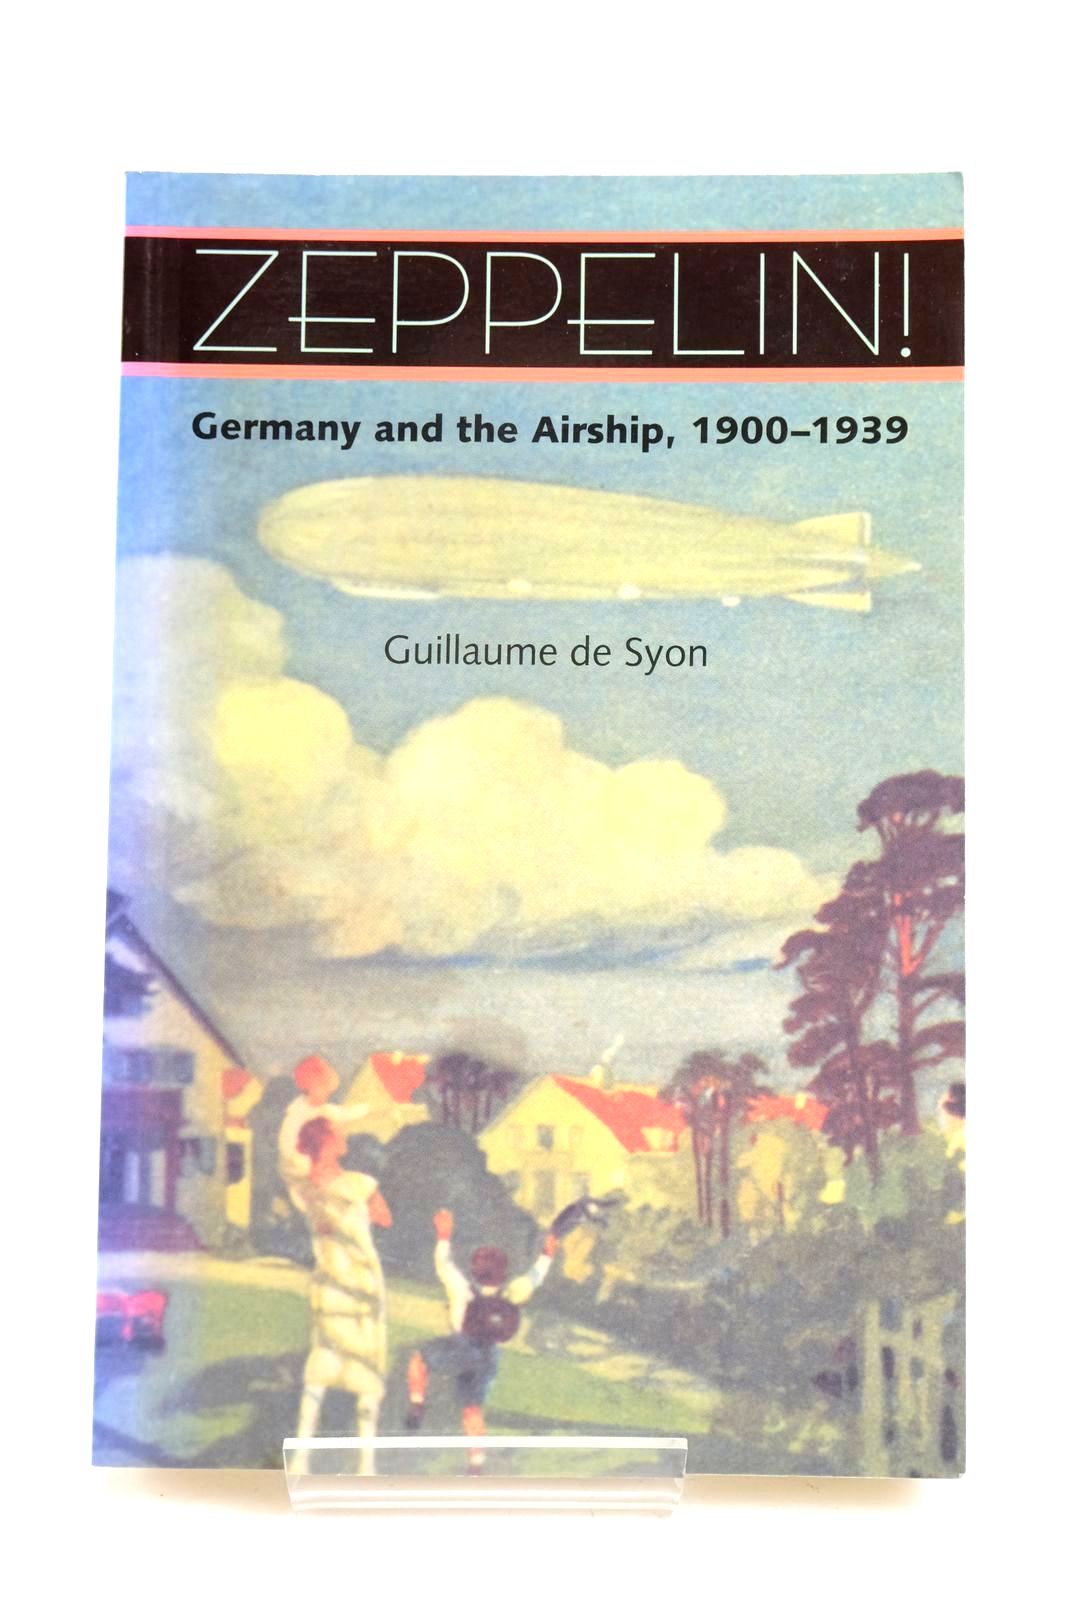 Photo of ZEPPELIN GERMANY AND THE AIRSHIP 1900 - 1939 written by De Syon, Guillaume published by The Johns Hopkins University Press (STOCK CODE: 1319654)  for sale by Stella & Rose's Books